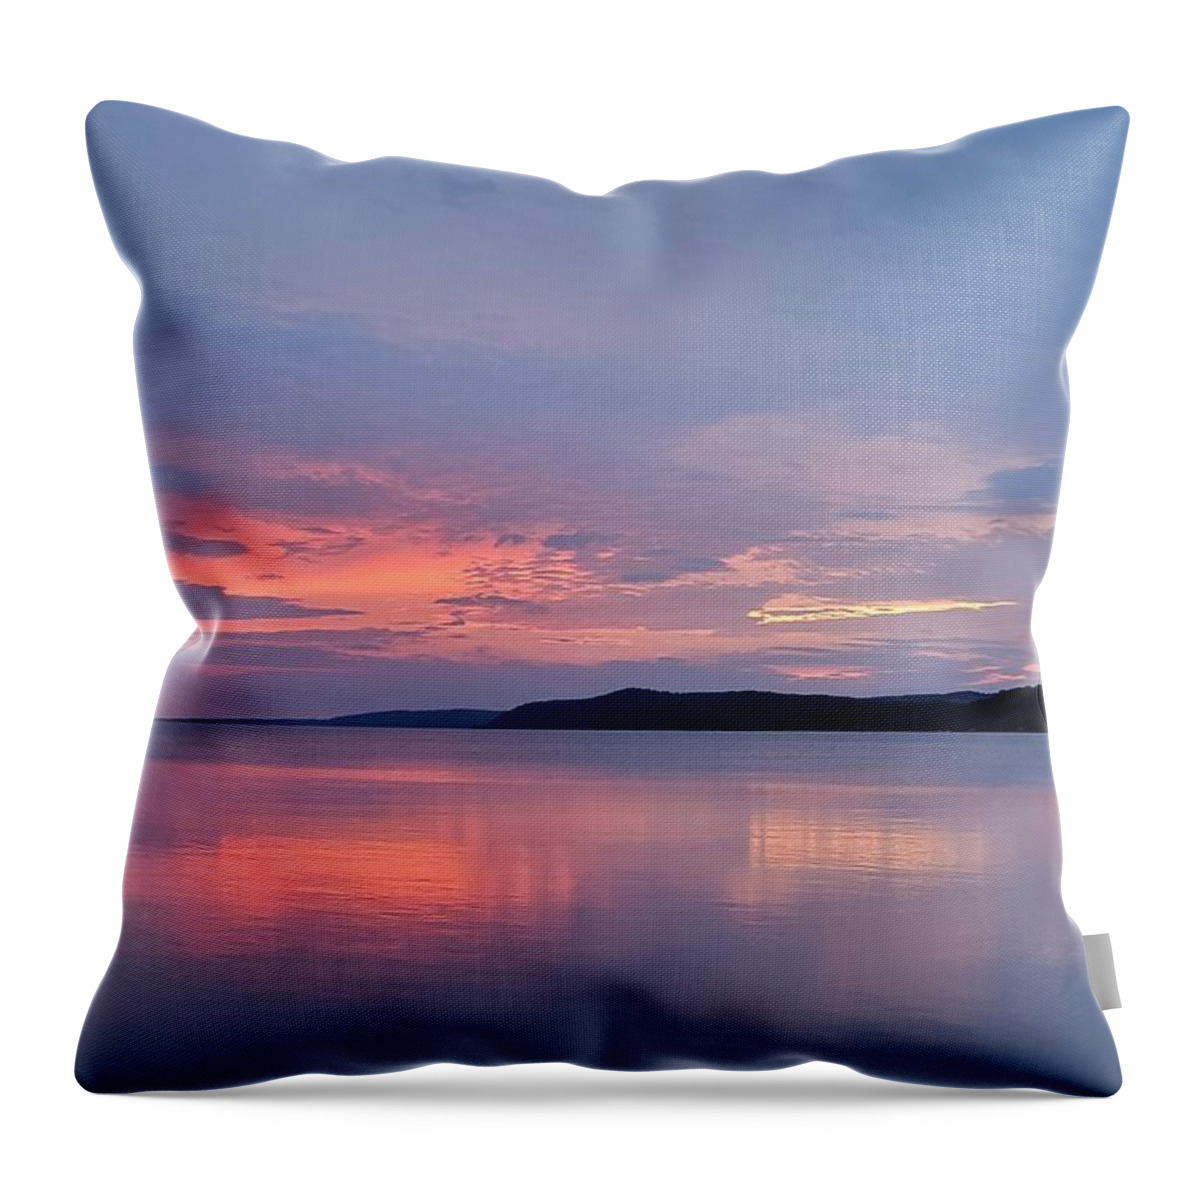 Blue Hour Throw Pillow featuring the photograph Blue Hour Sunset - Crystal Lake by Jennifer Forsyth